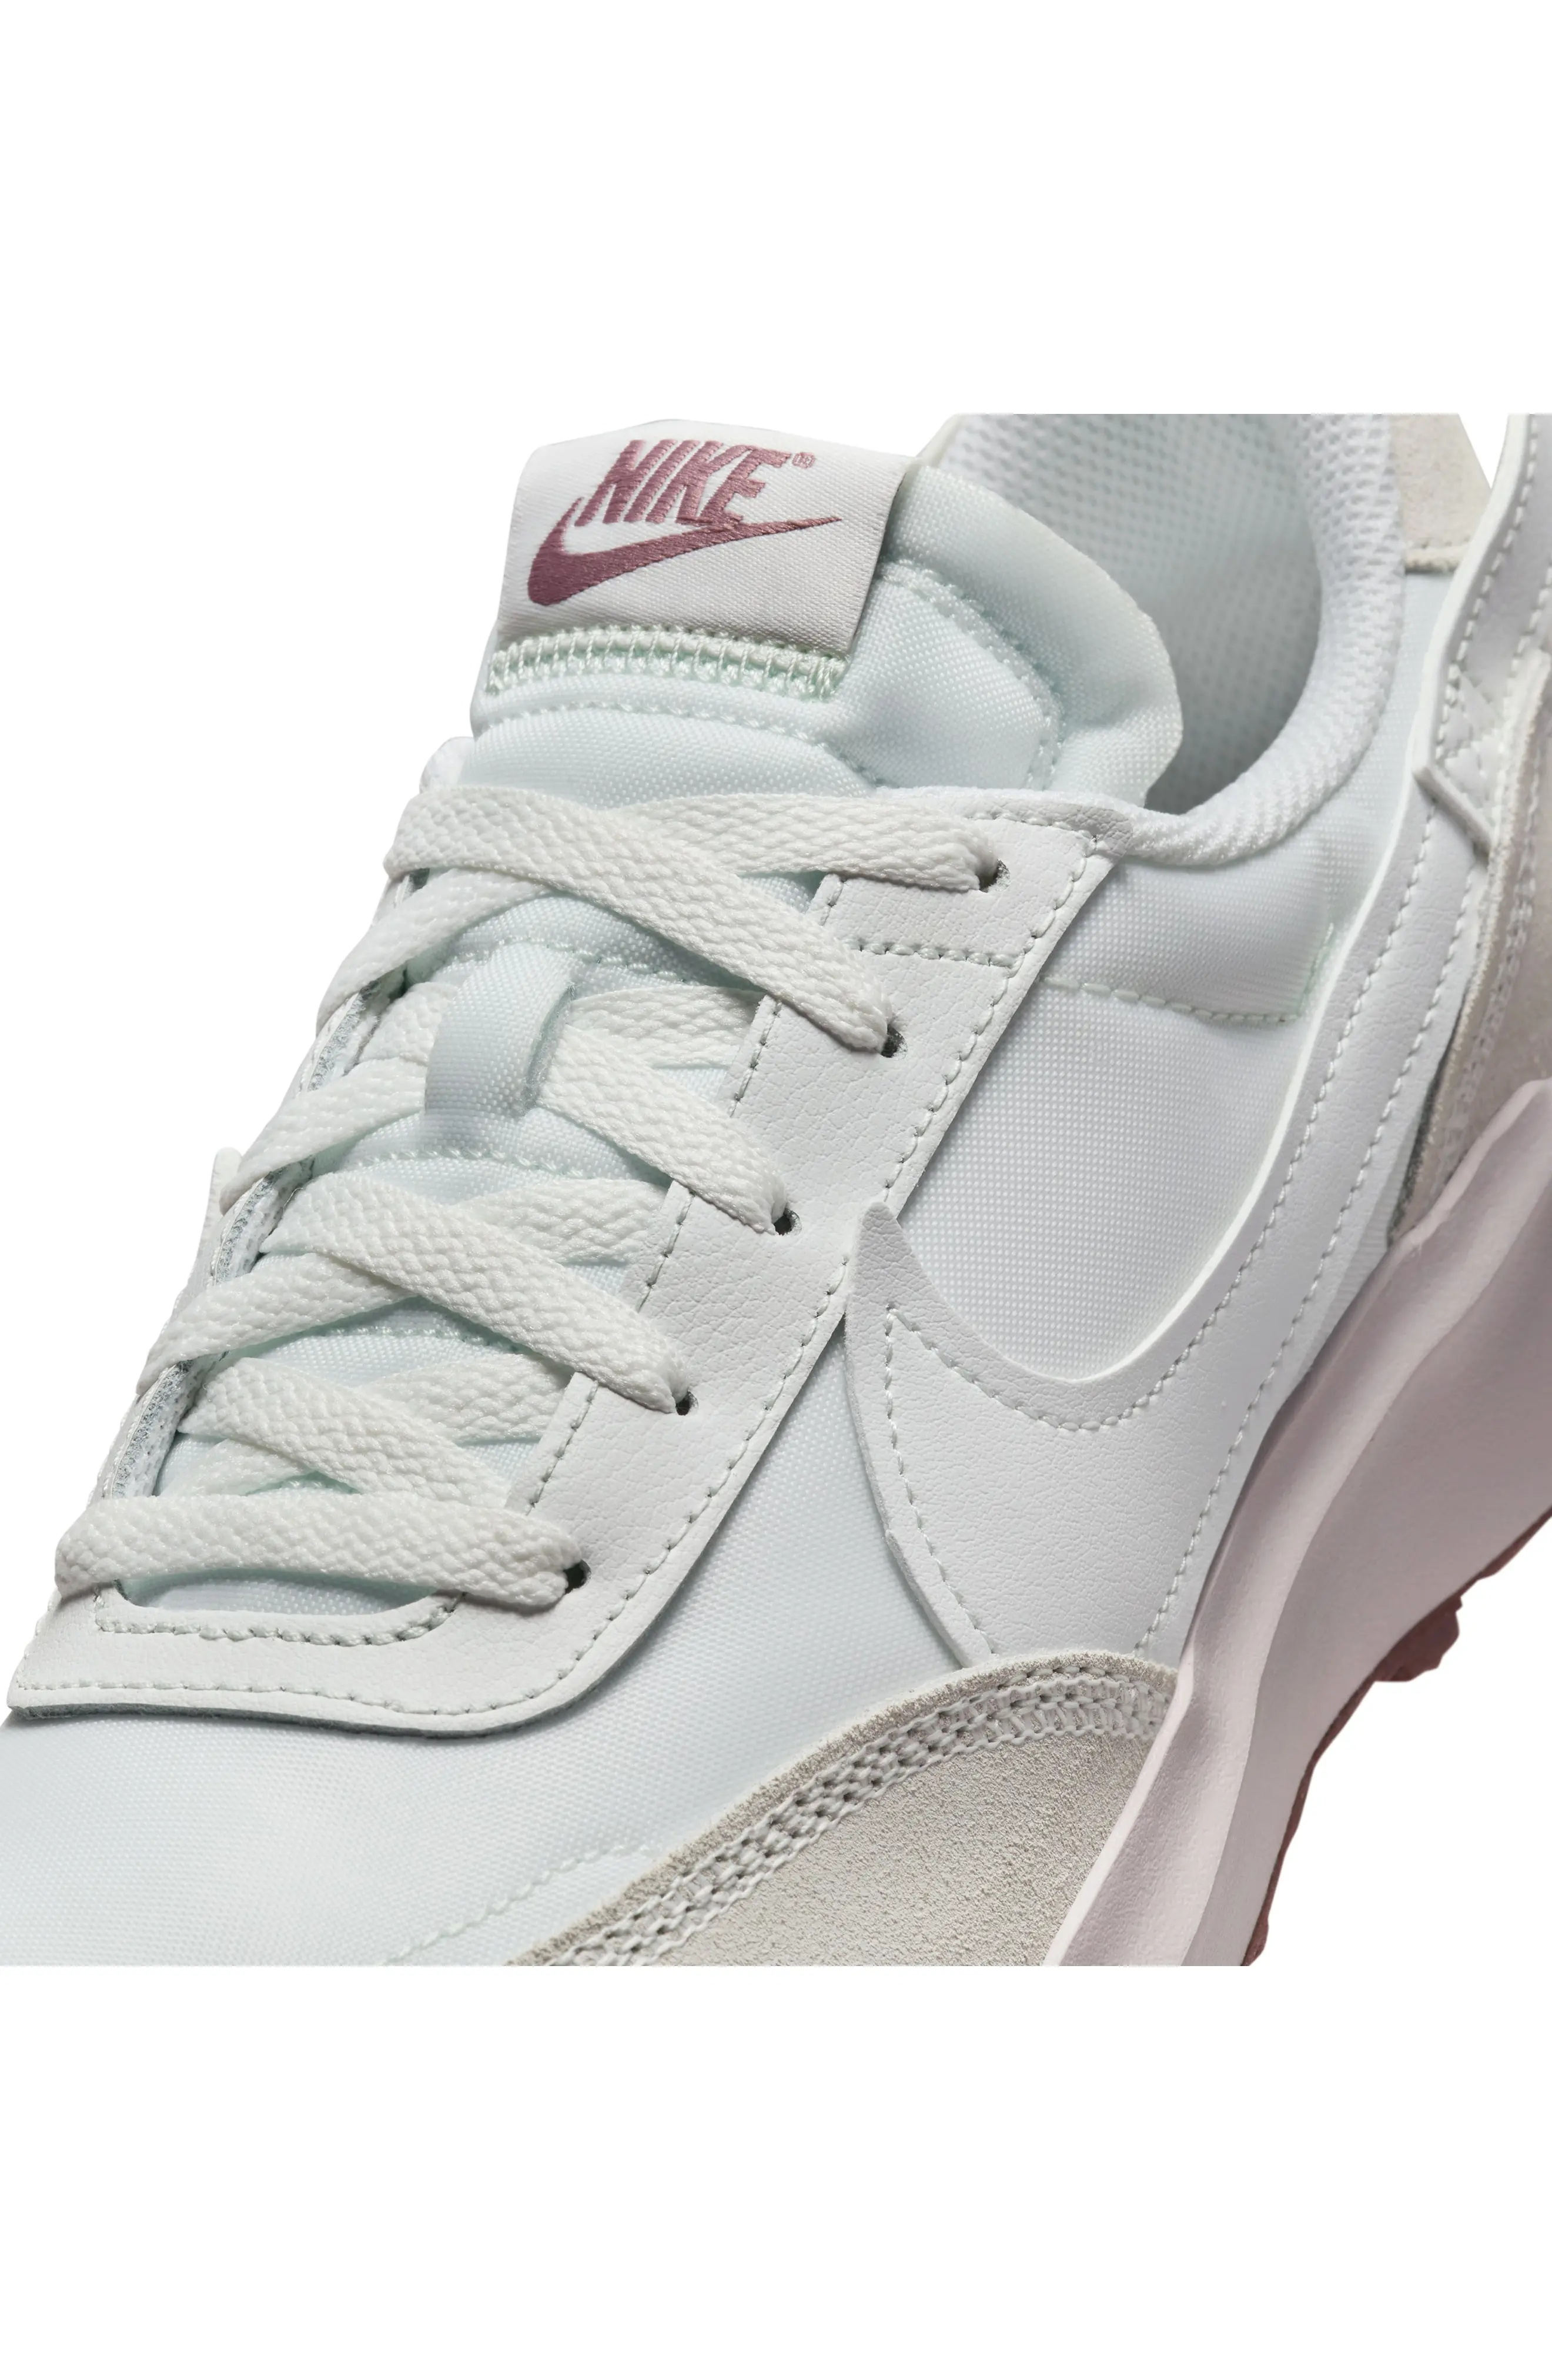 Waffle Debut Sneaker in White/Platinum/Mauve - 10